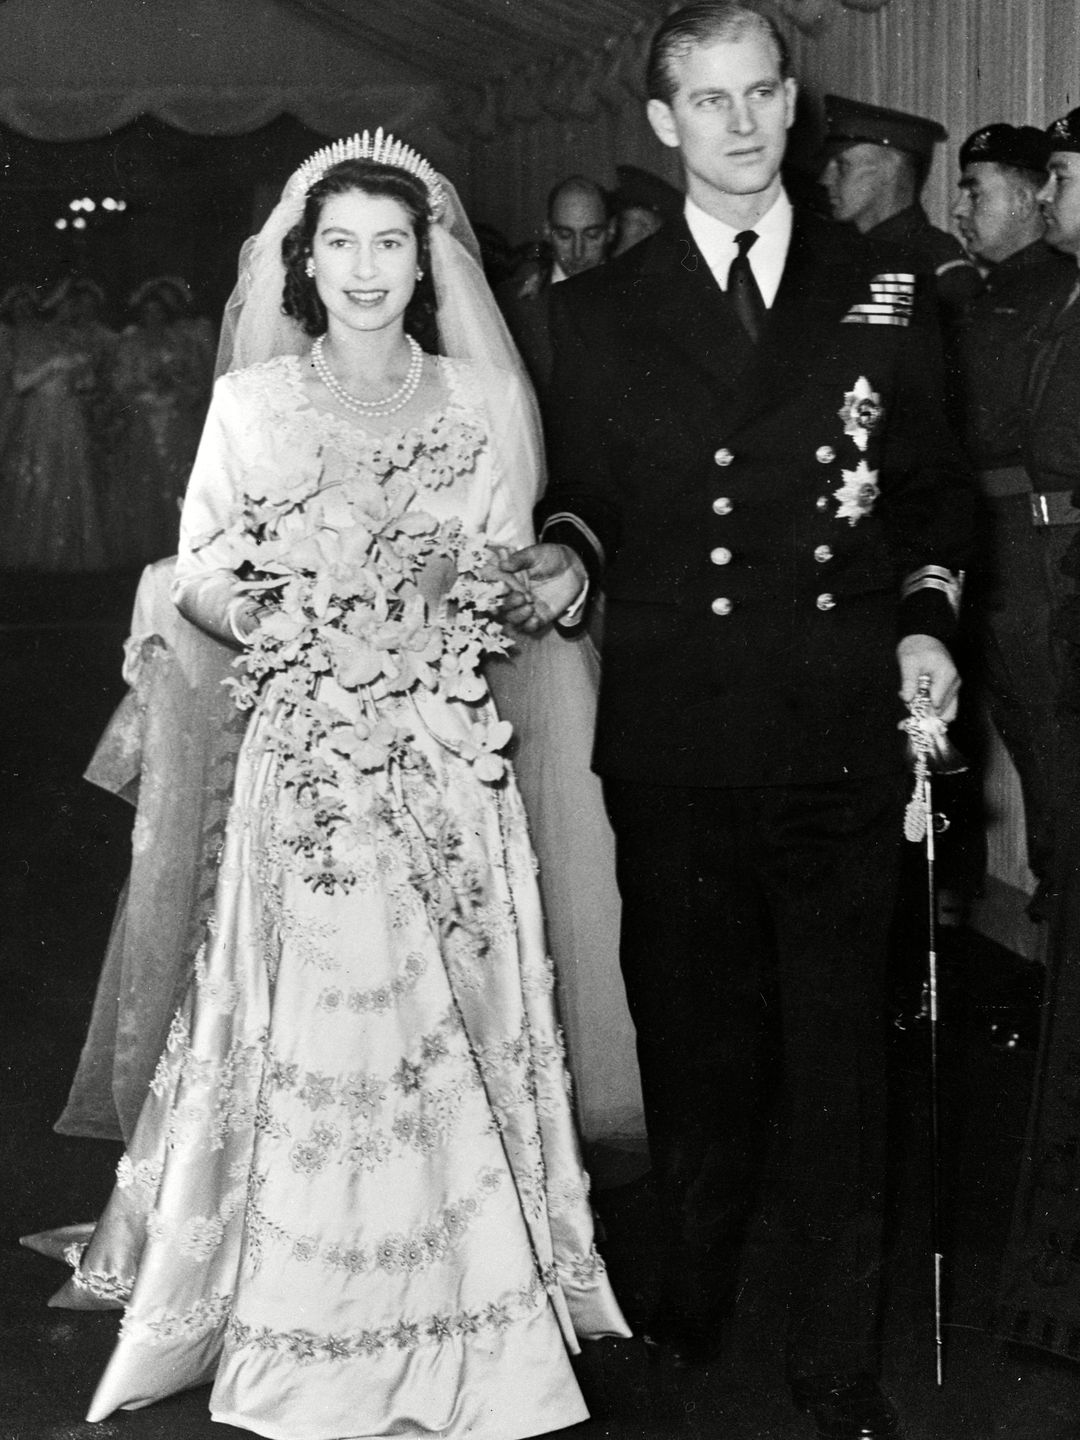 The Queen and Prince Philip smiling on their wedding day in November 1947